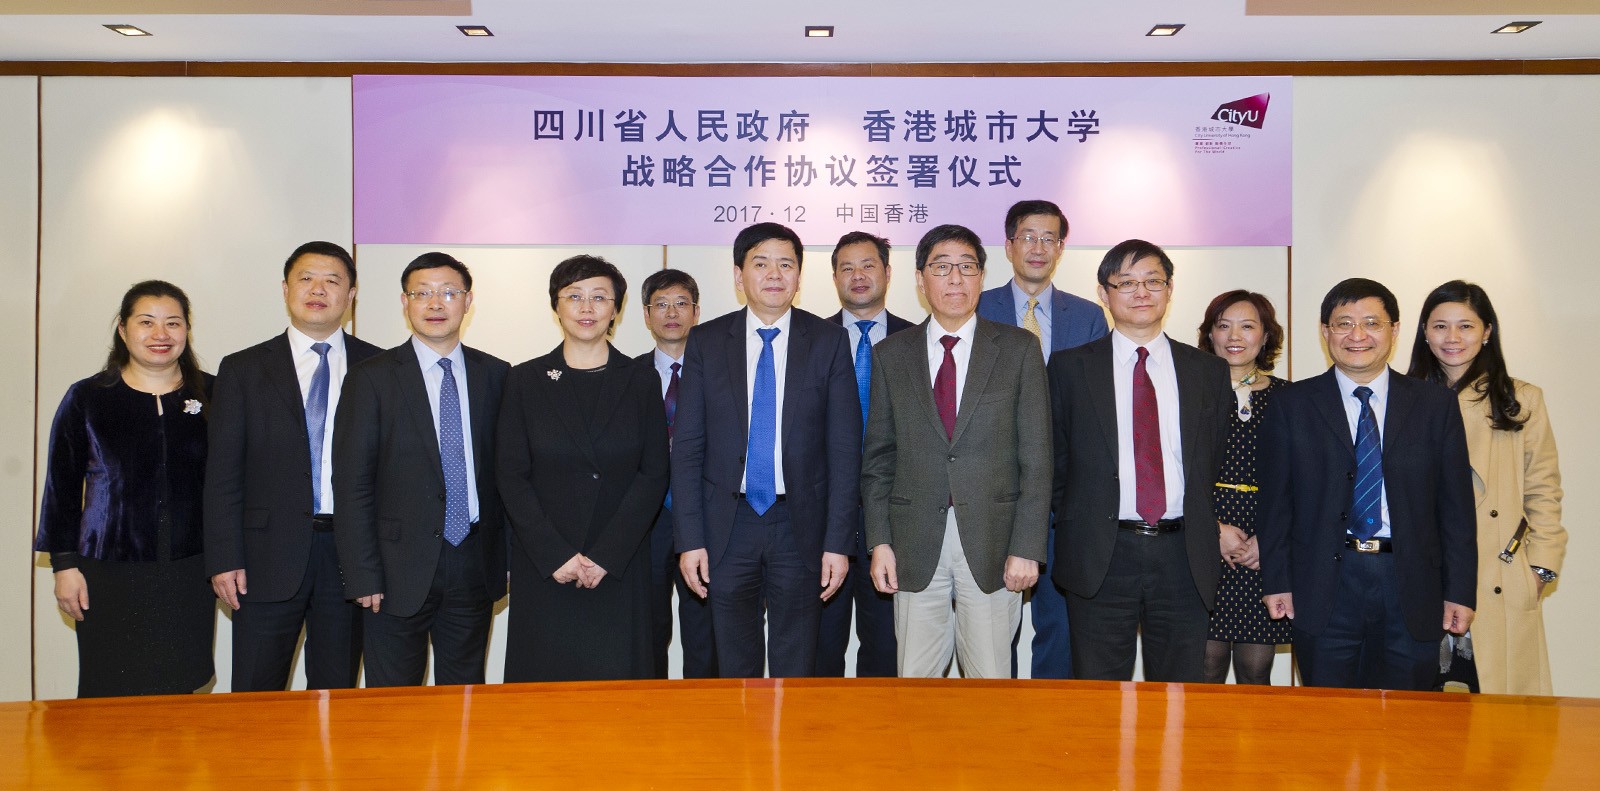 Group photo of Sichuan delegation and CityU’s senior management。